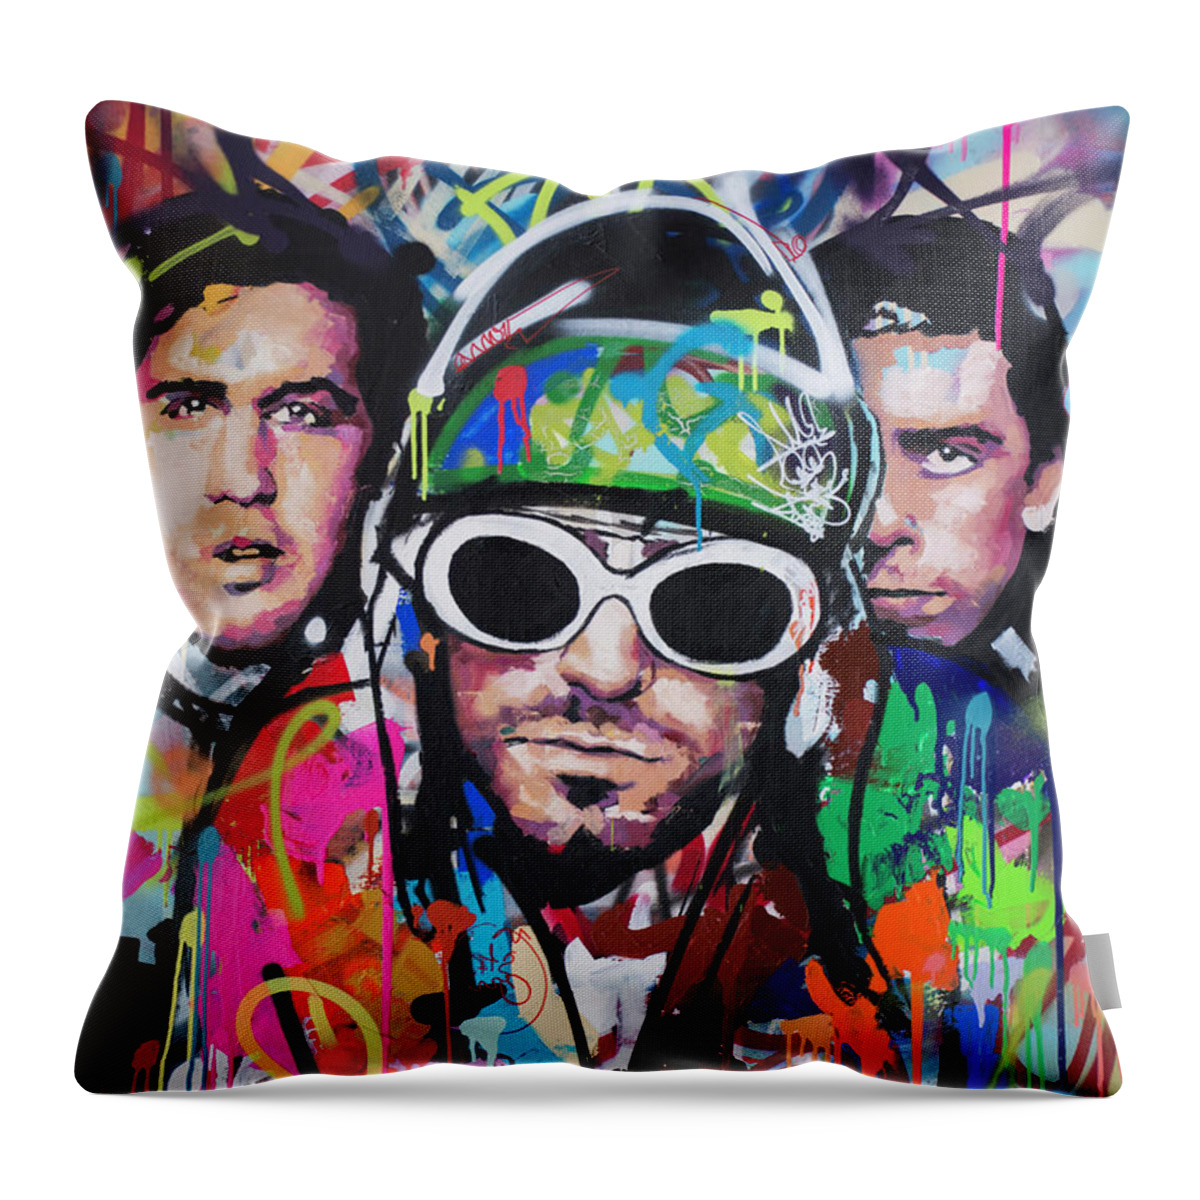 Nirvana Throw Pillow featuring the painting Nirvana by Richard Day